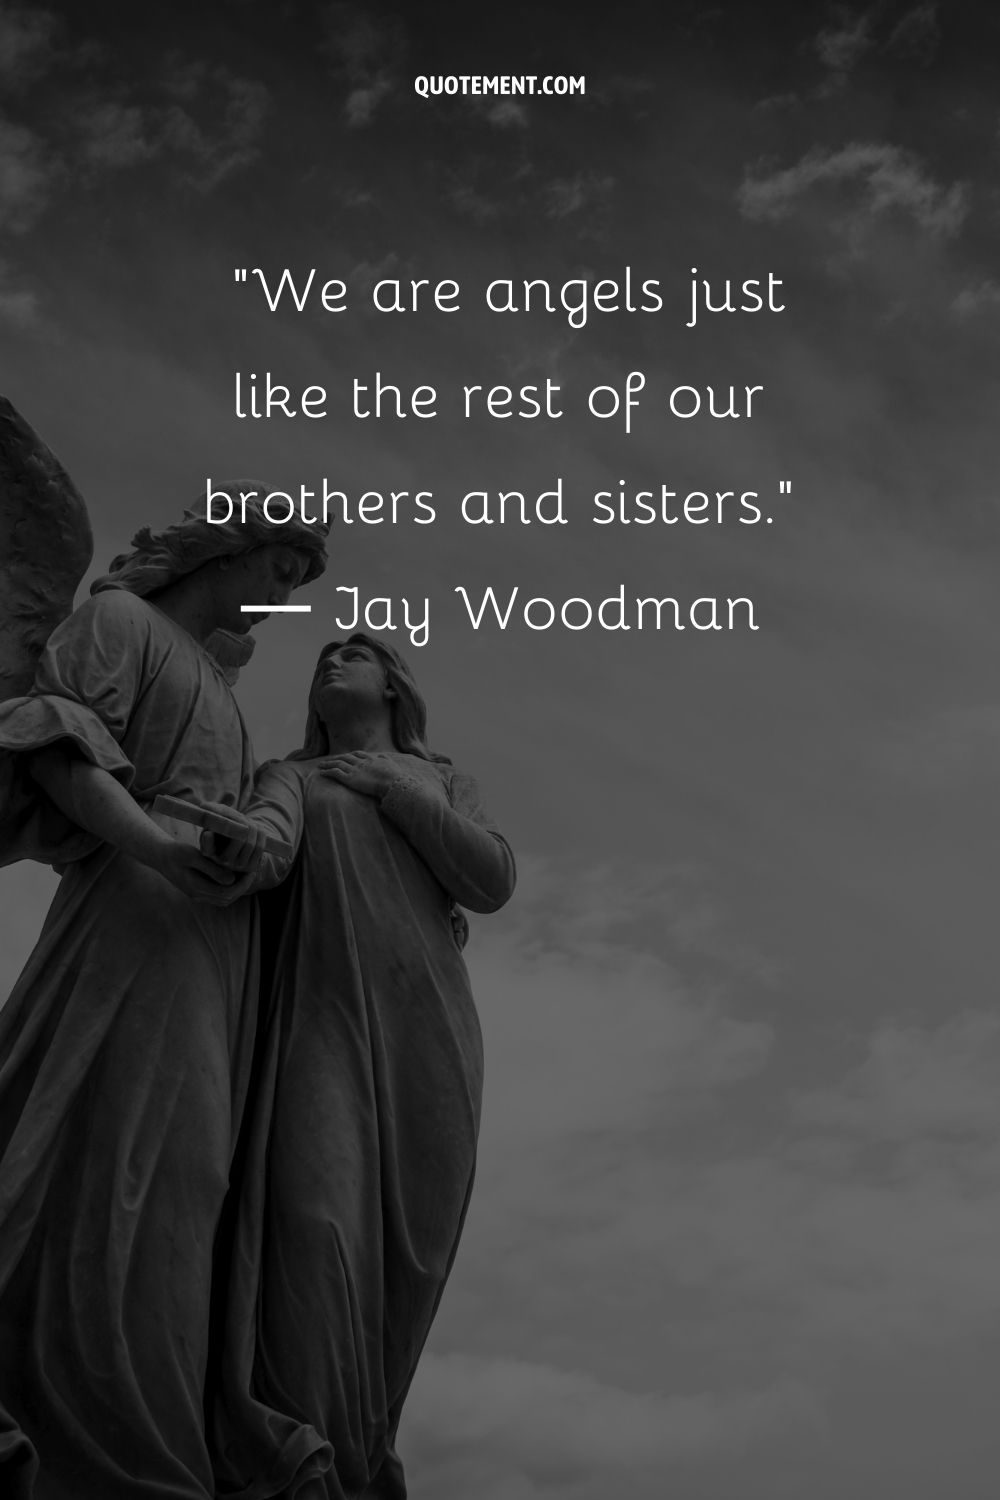 We are angels just like the rest of our brothers and sisters.